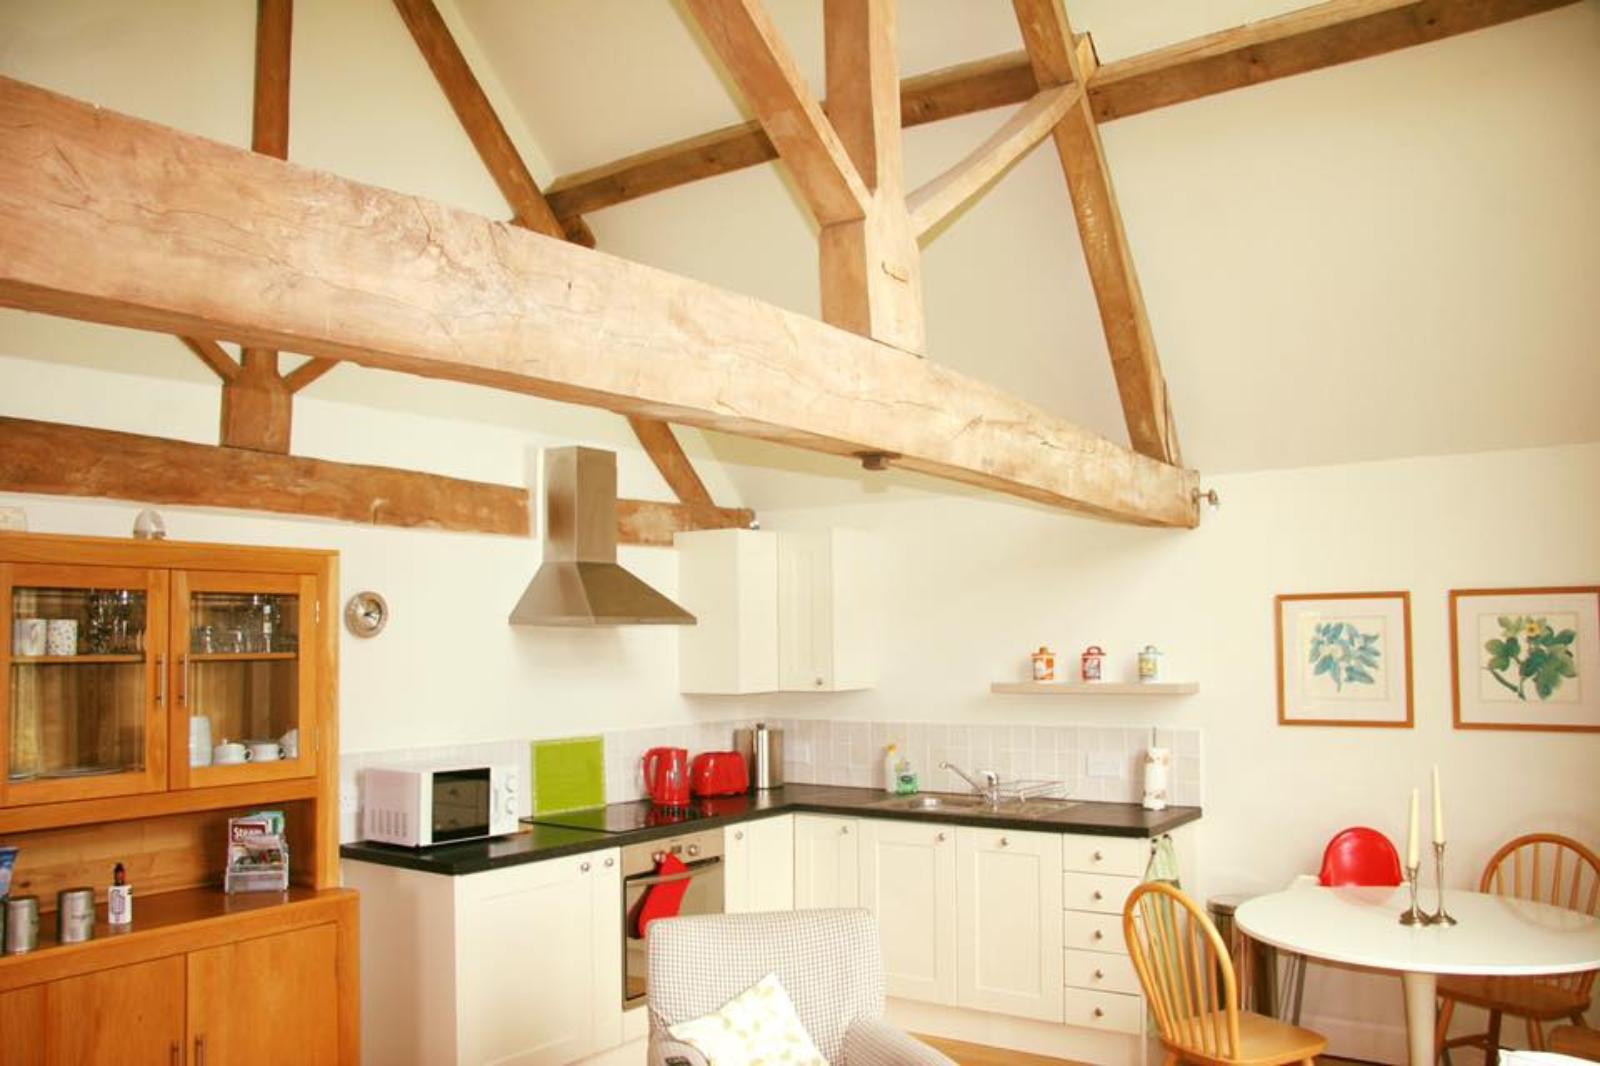 Fully equipped self catering kitchen The Hayloft